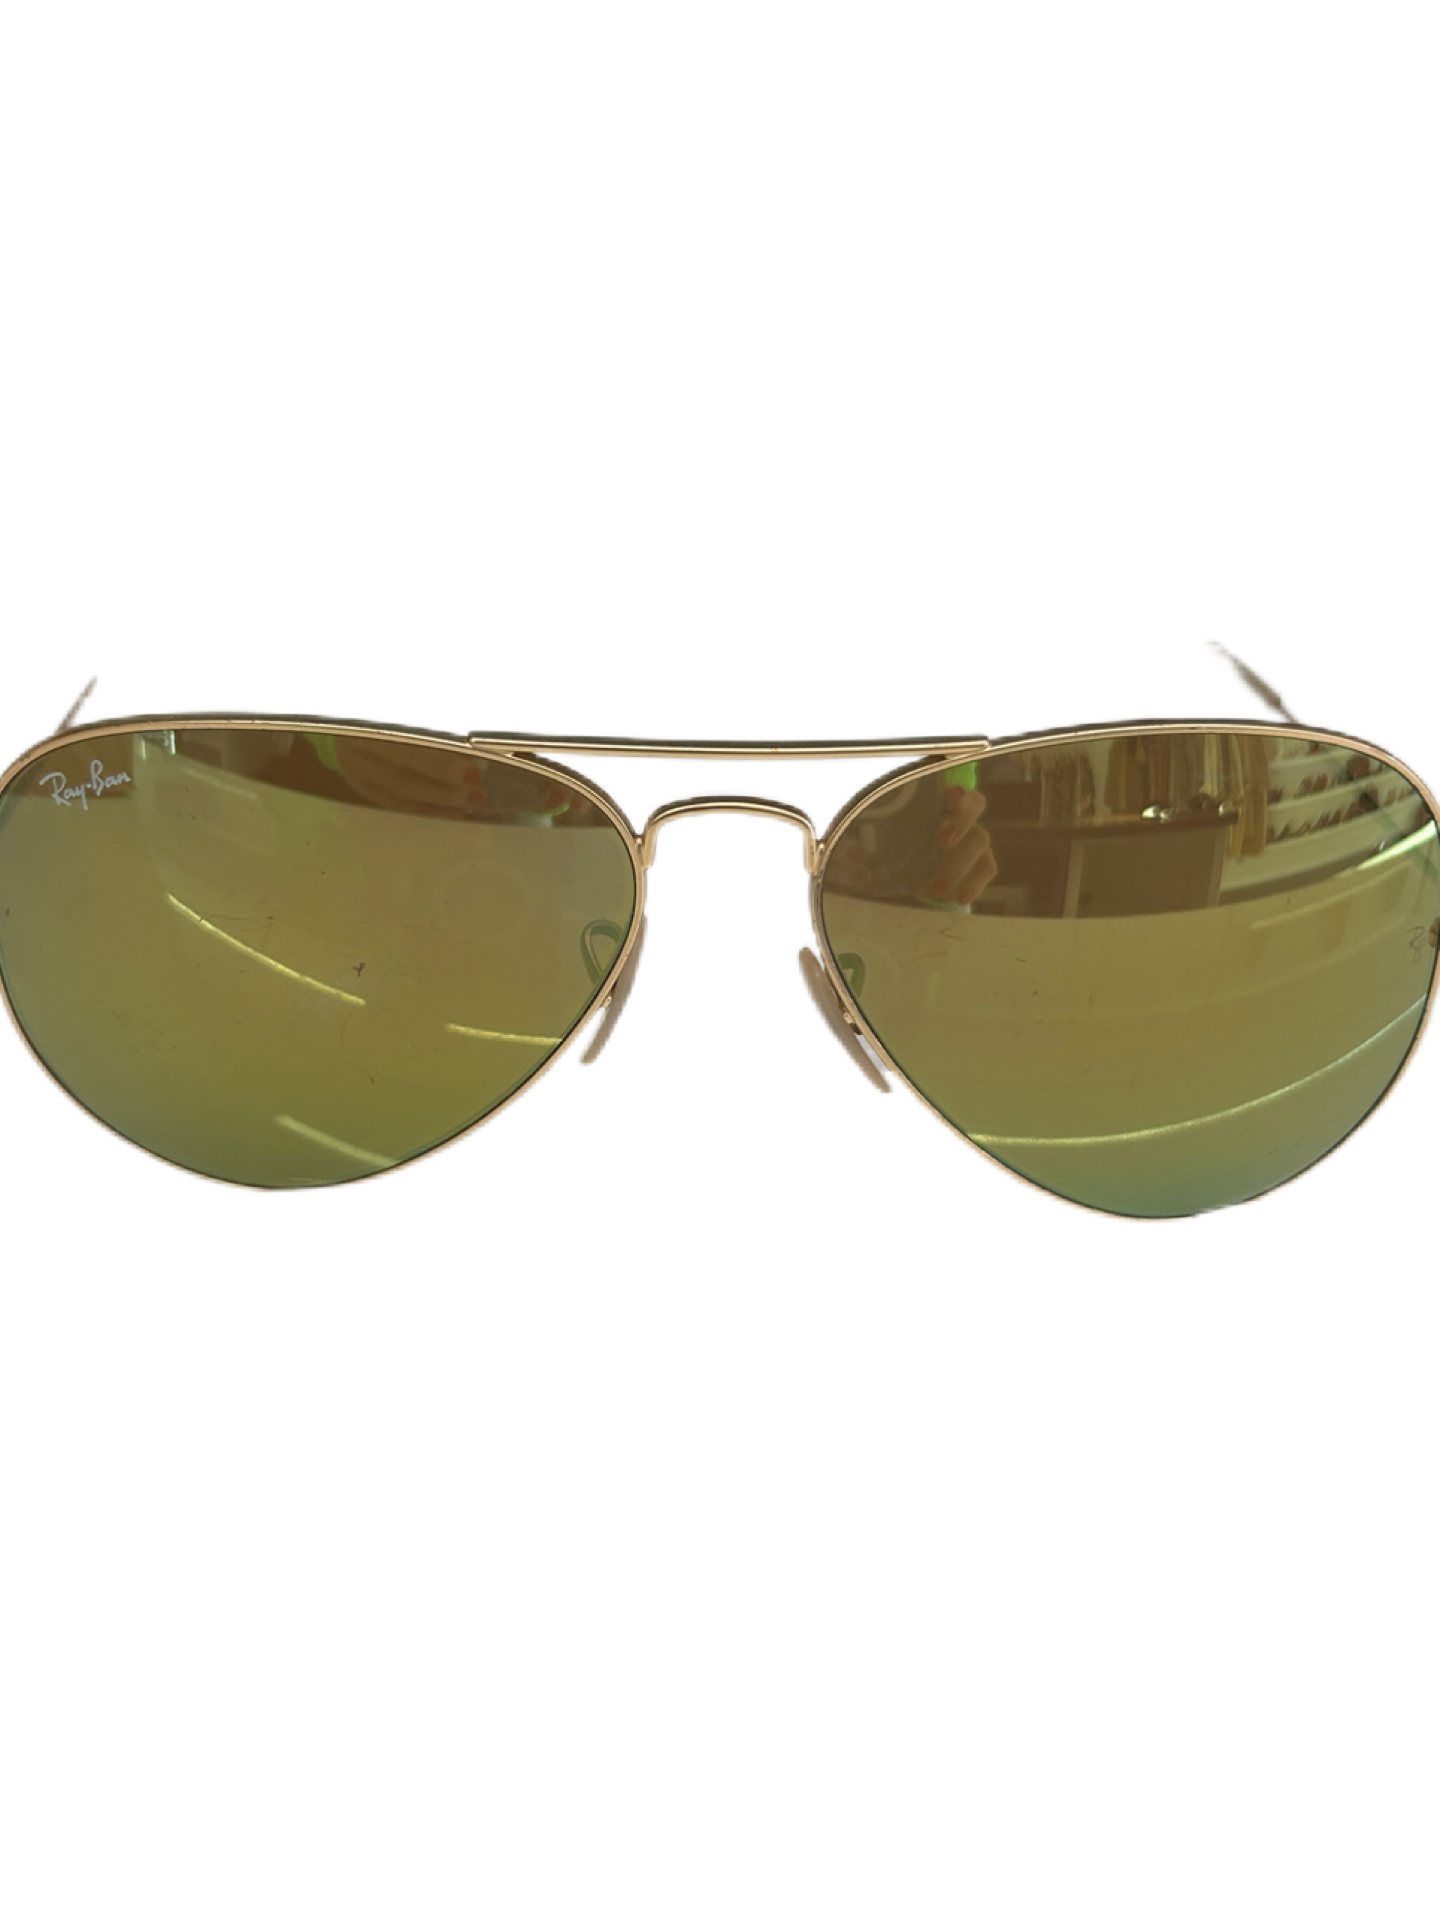 Ray-Ban Gold Sunglasses with Yellow-Gold Mirrored Lenses